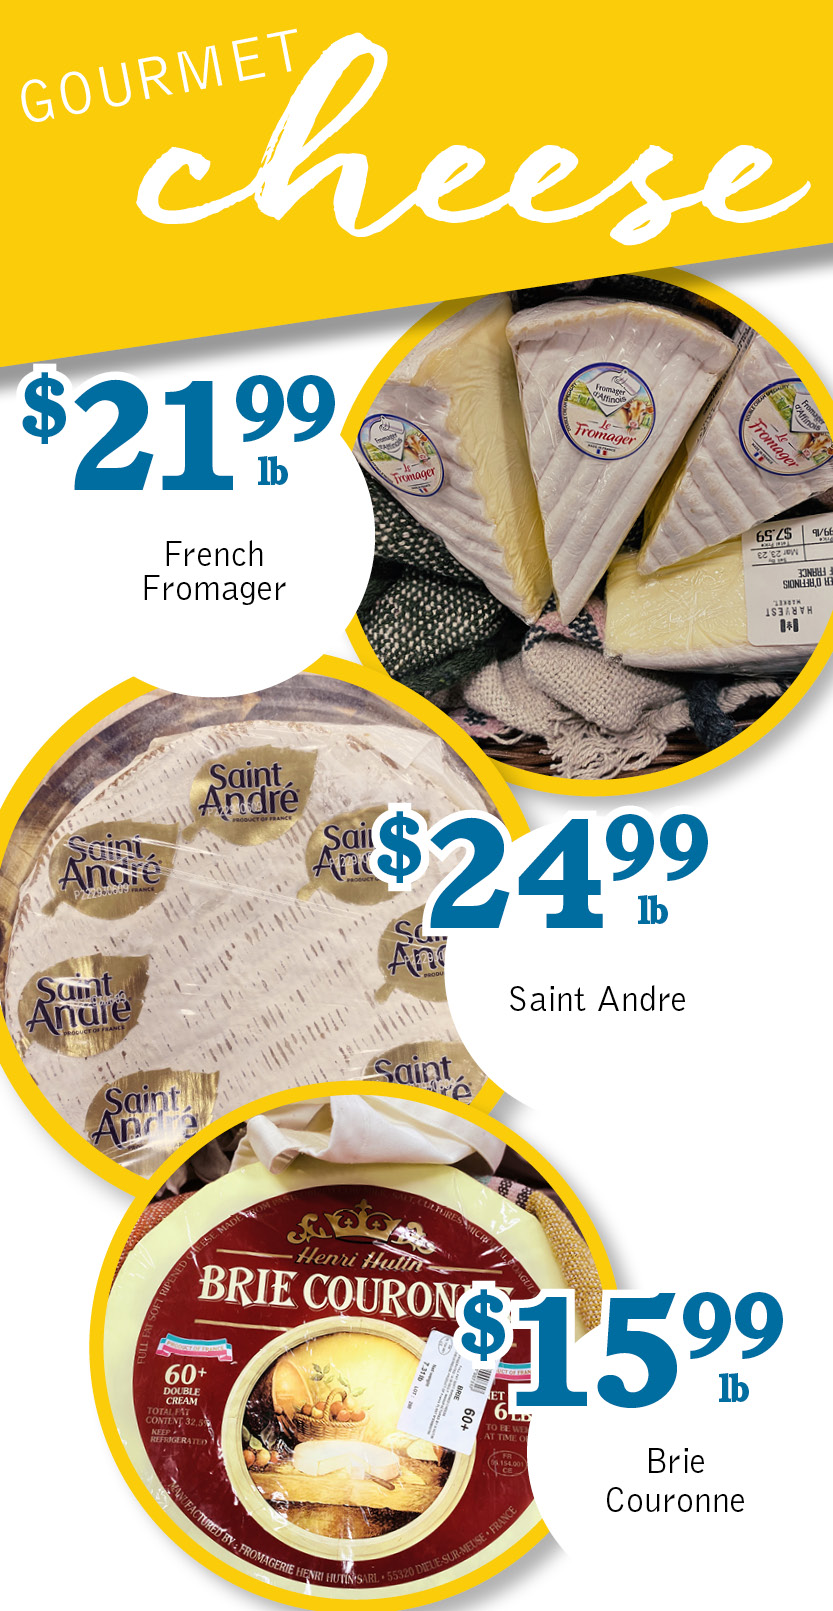 Gourmet Cheese Weekly Specials